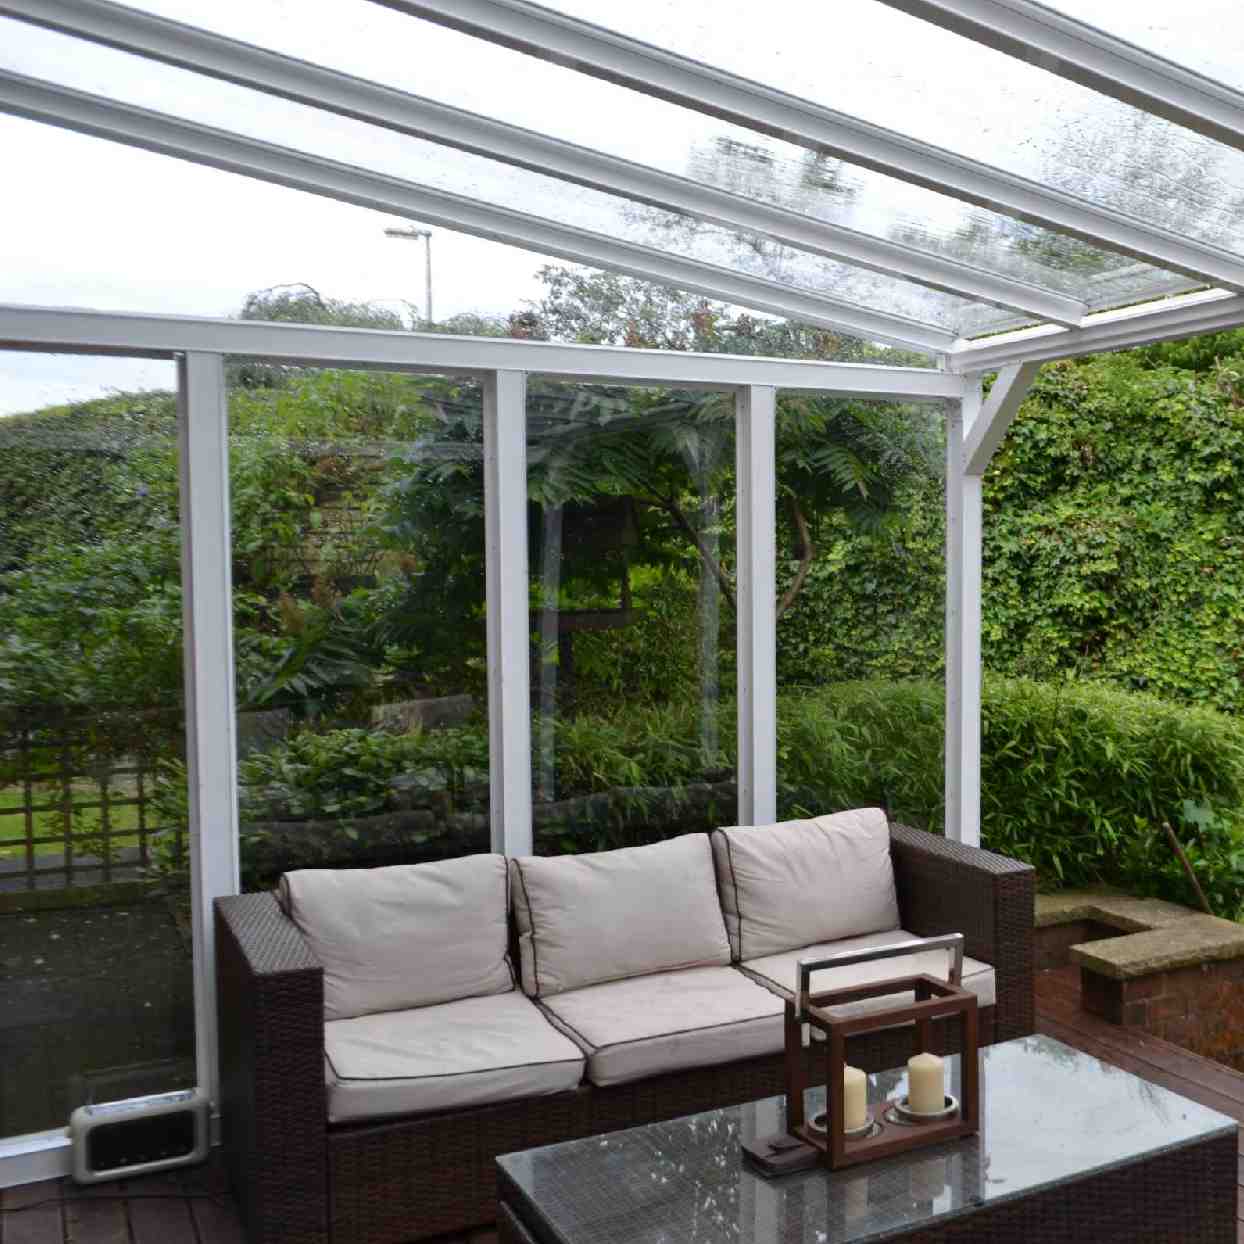 Buy Omega Verandah White with 6mm Glass Clear Plate Polycarbonate Glazing - 4.9m (W) x 2.0m (P), (3) Supporting Posts online today